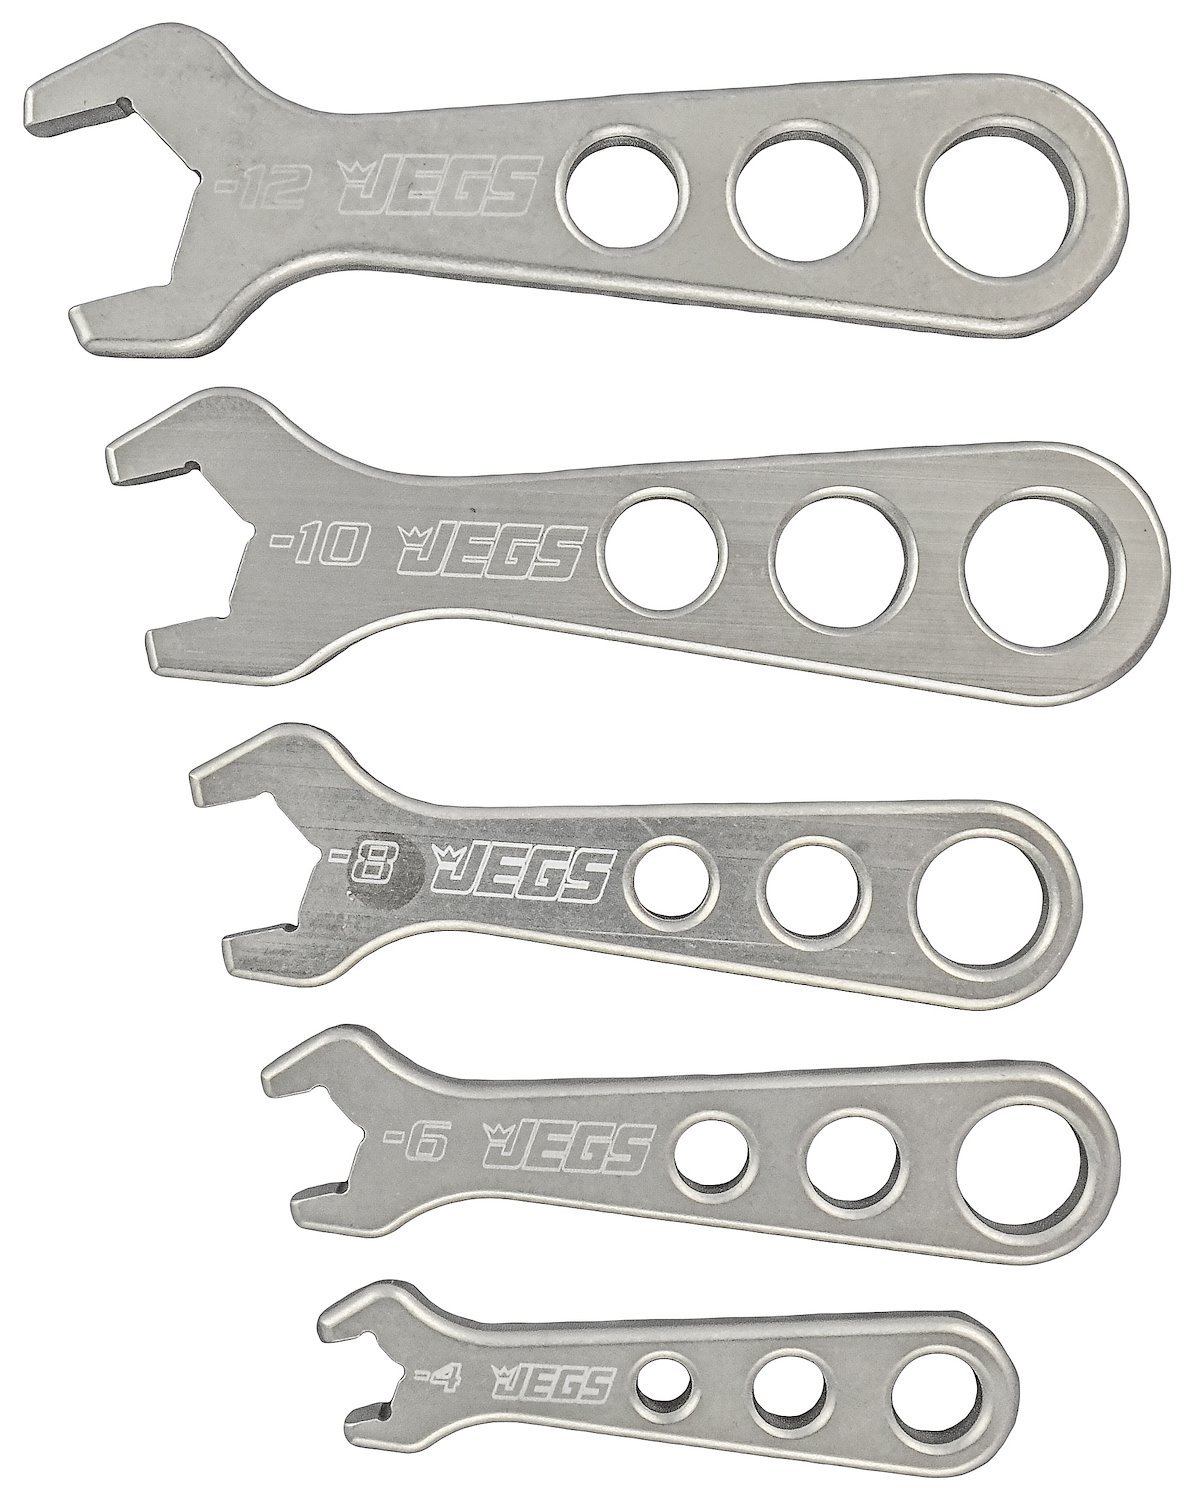 AN Wrench Set Includes -4AN to -12AN Standard Wrenches